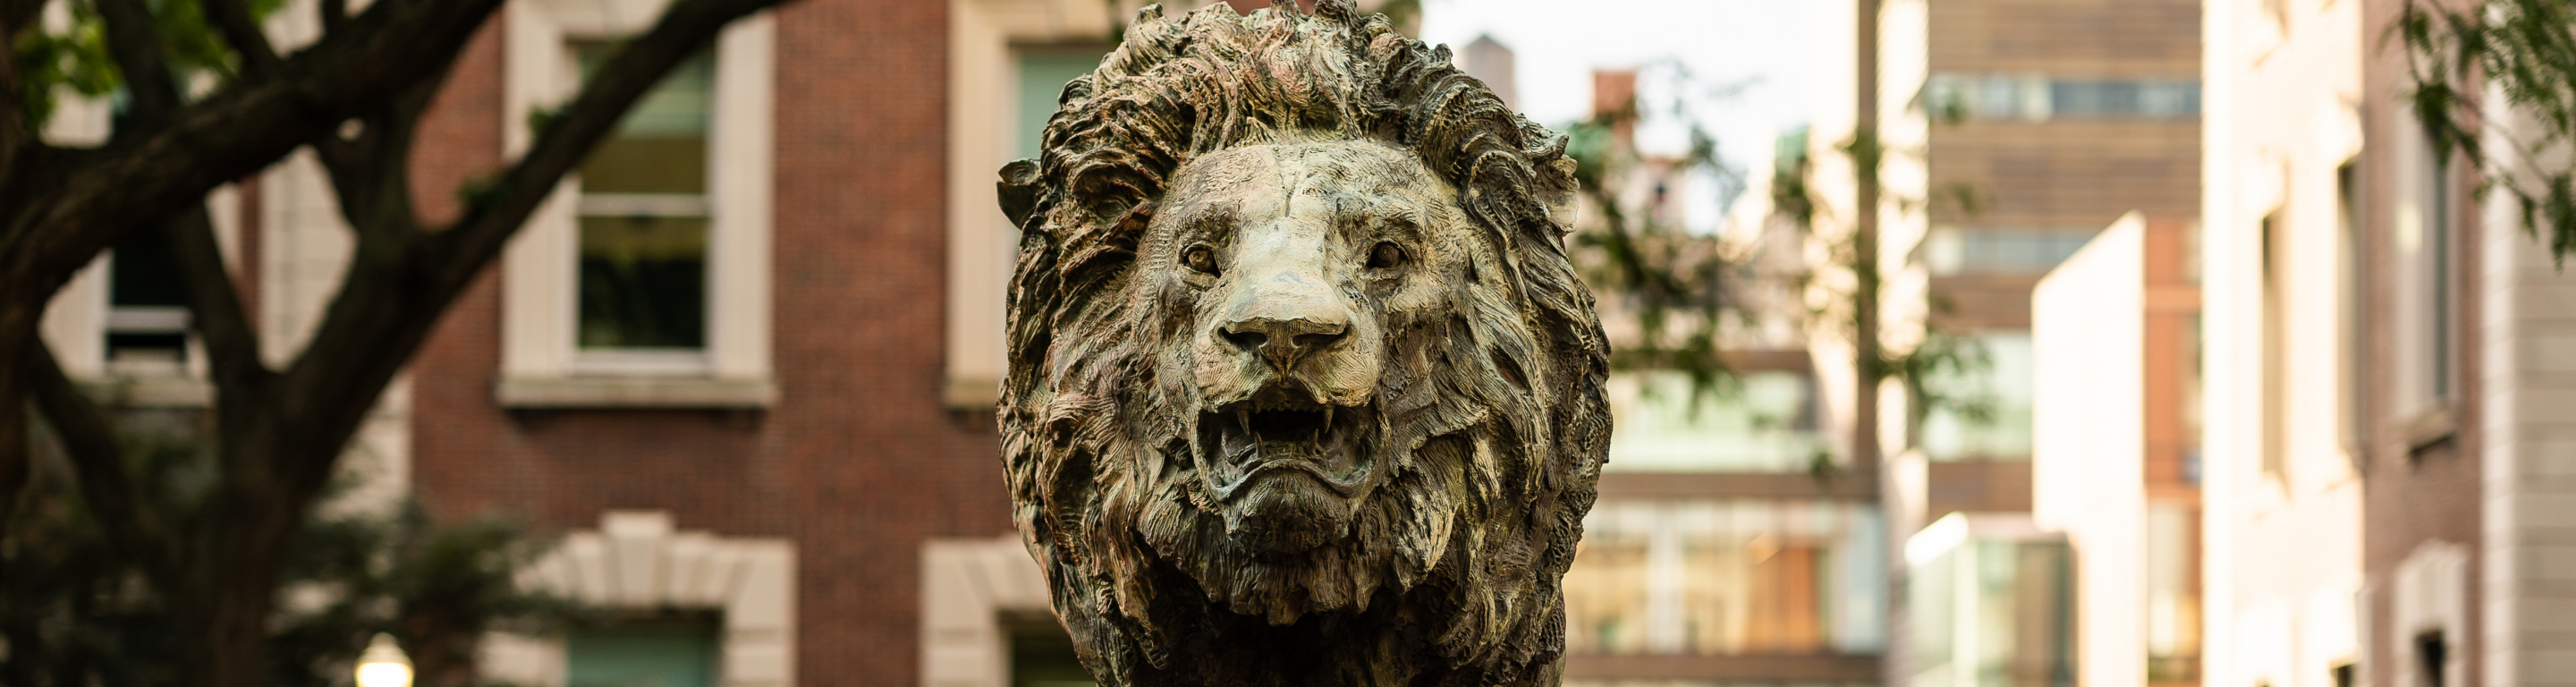 Front view of a bronze lion sculpture with campus buildings in the background.